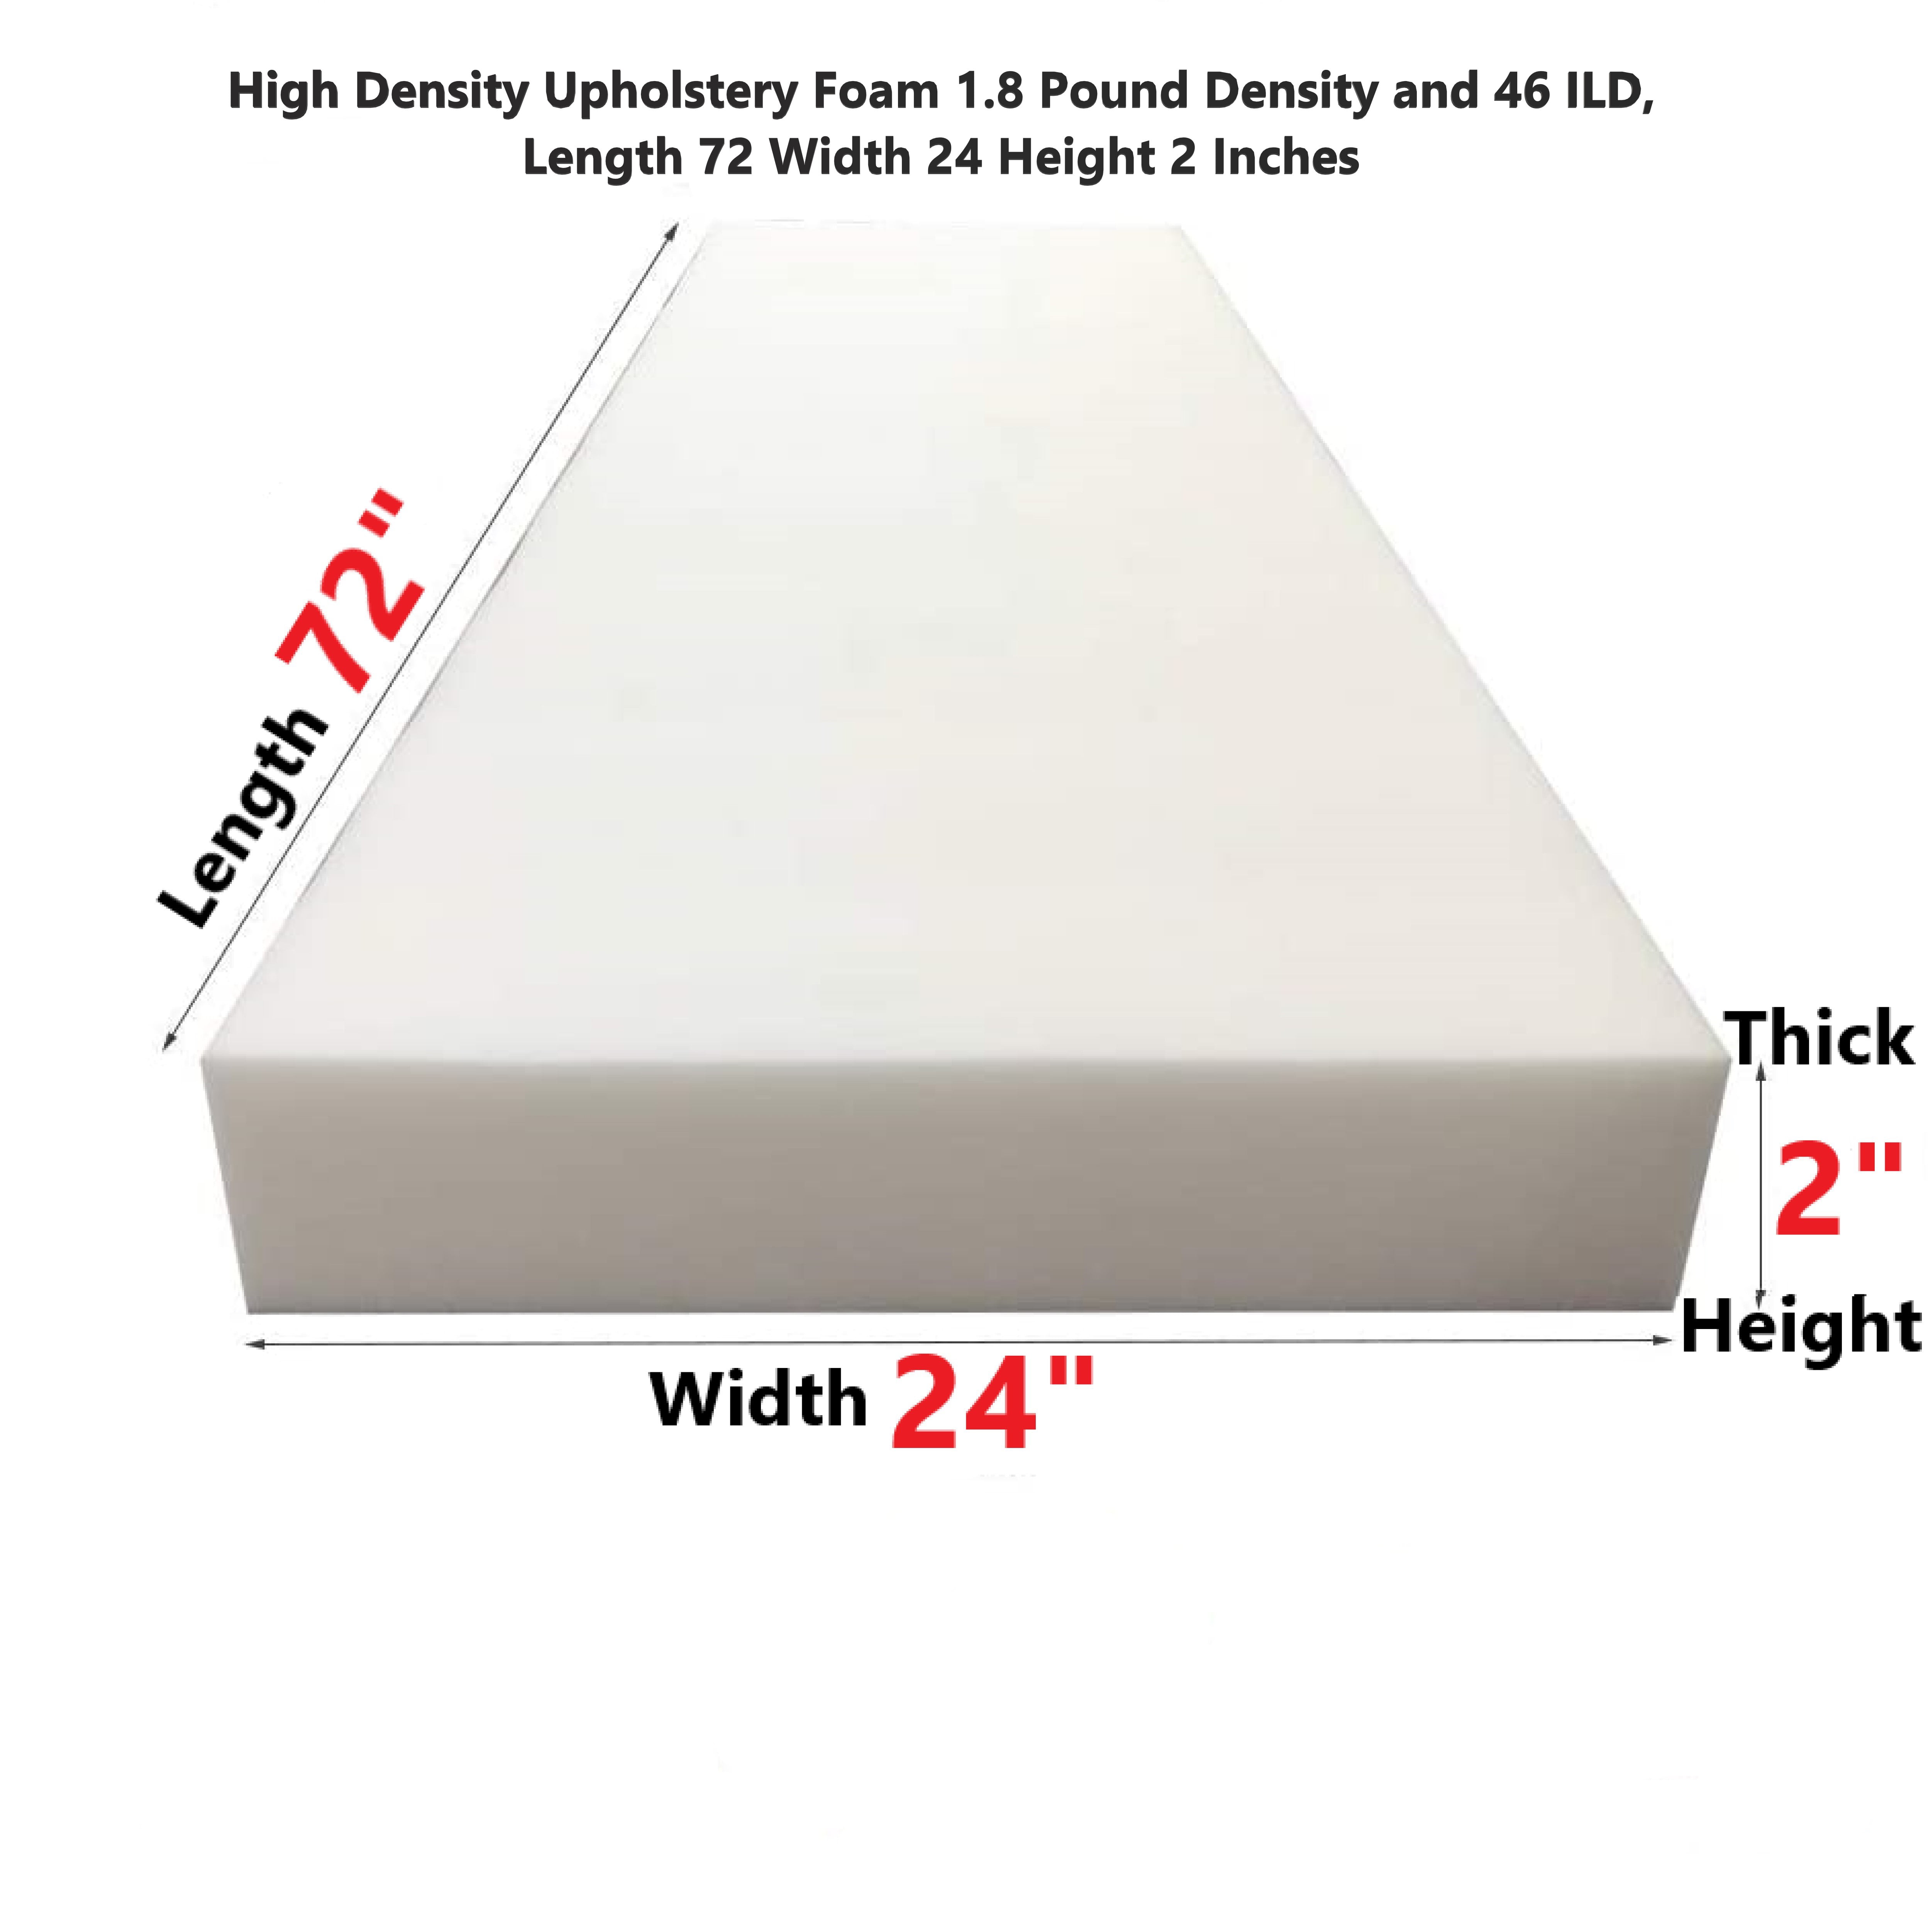 High Density Upholstery Foam 1.8 Pound Density and 46 ILD Length 24 Width 24 Height 4 Inches Thick Easy to Customize Polyurethane Reupholster Replacement Cushion for Indoor or Outdoor Furniture